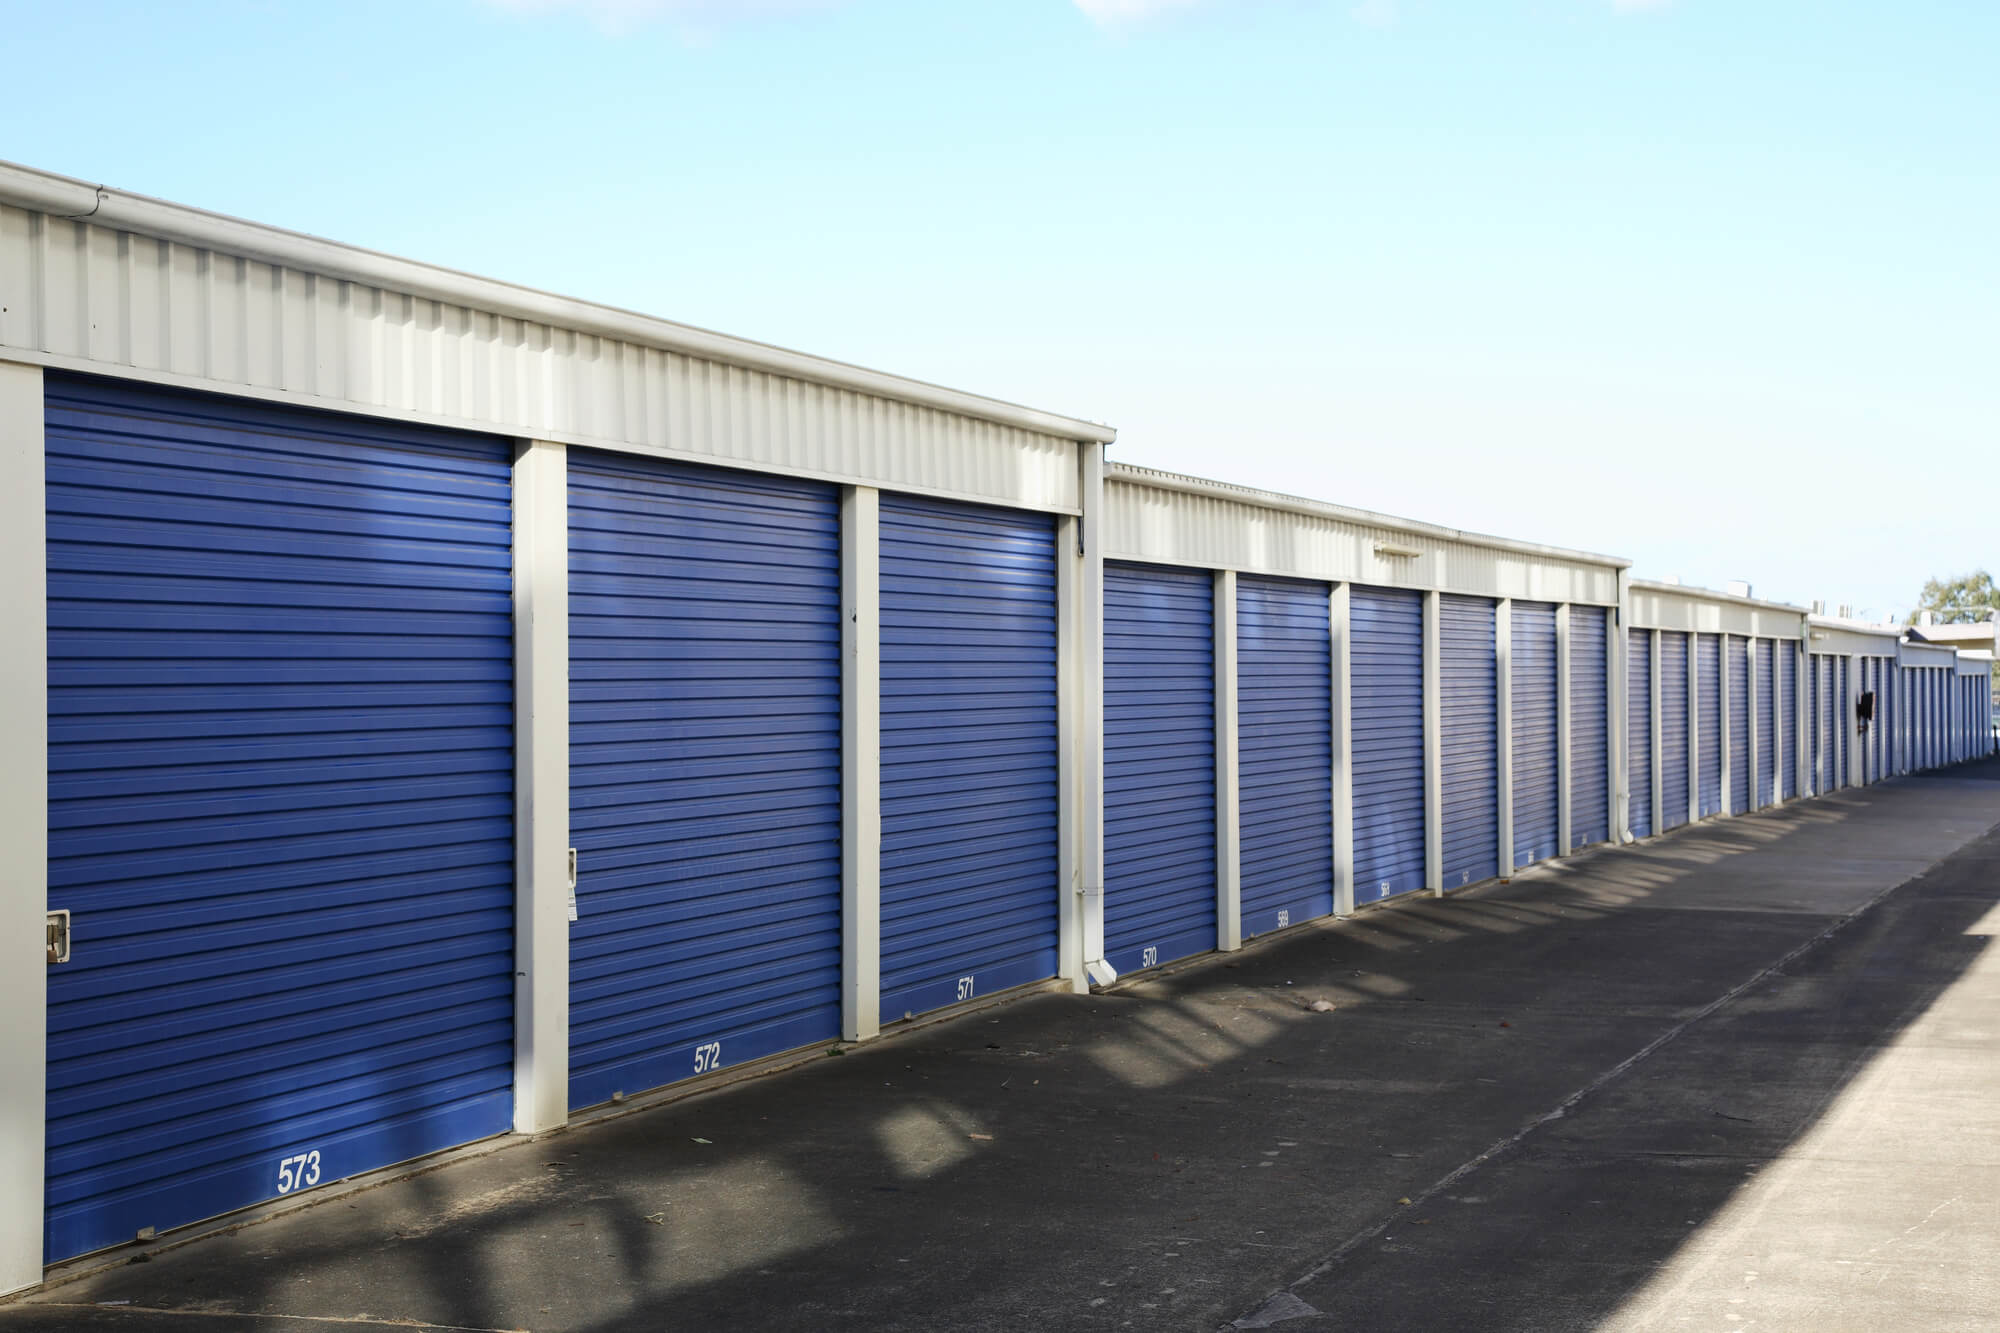 Outdoor storage with blue shutters